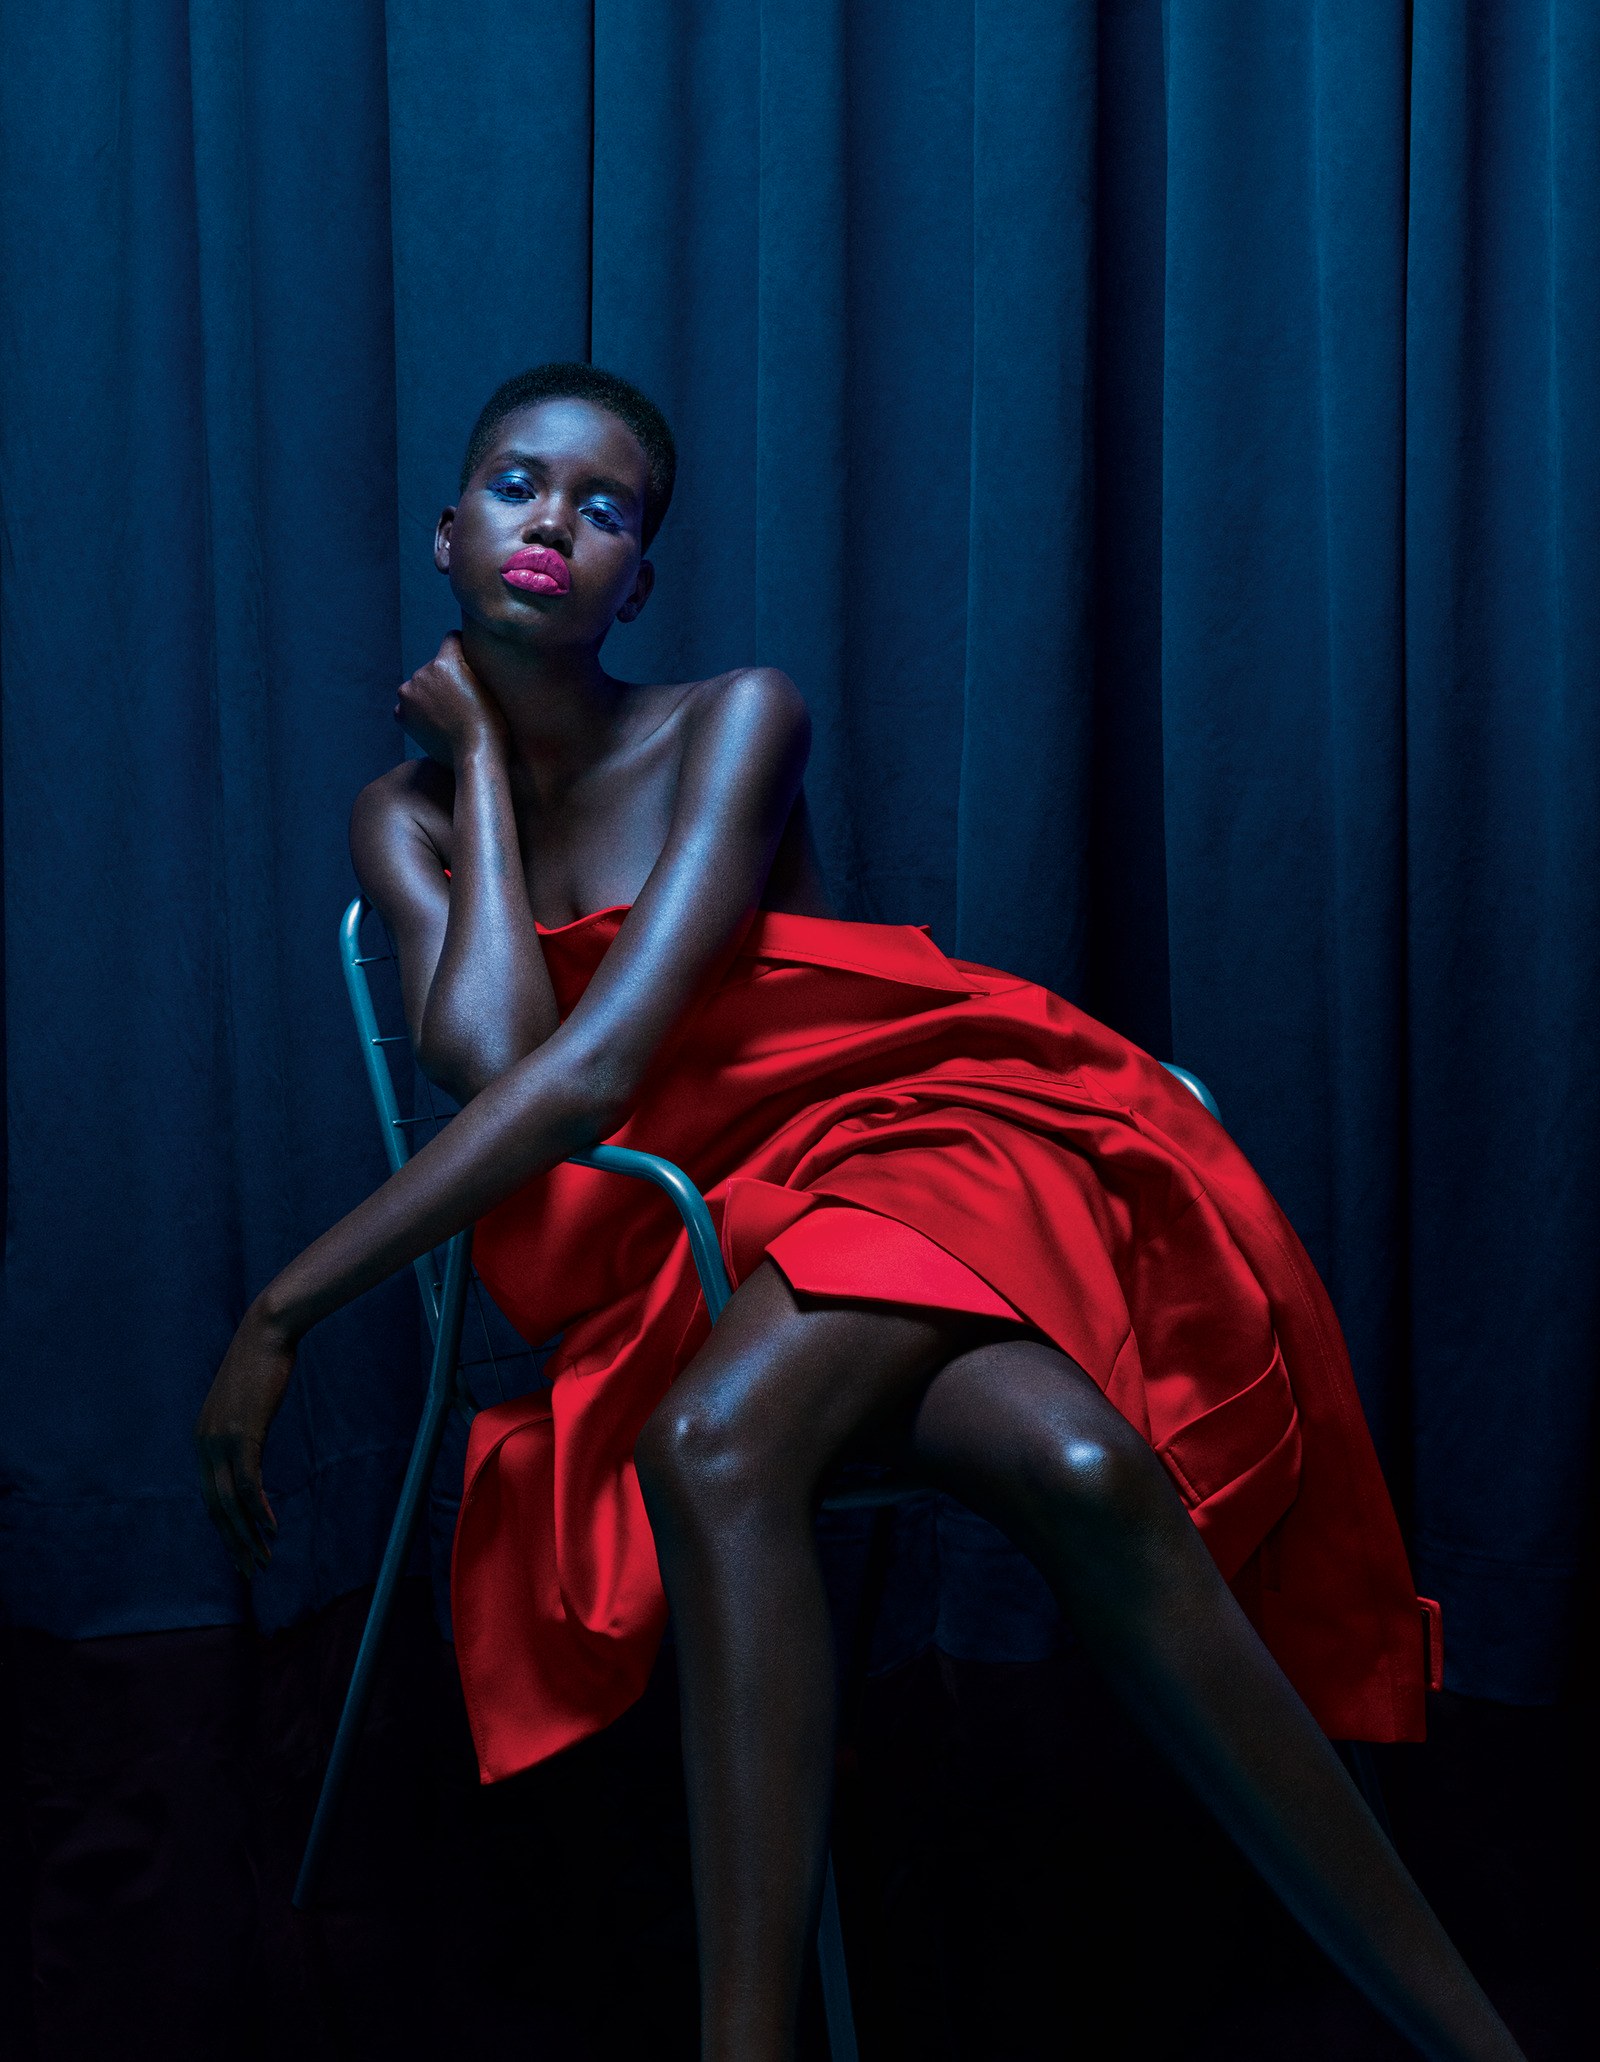 Model Adut Akech Tells Her Touching Story For Allure Magazine | Fashion ...